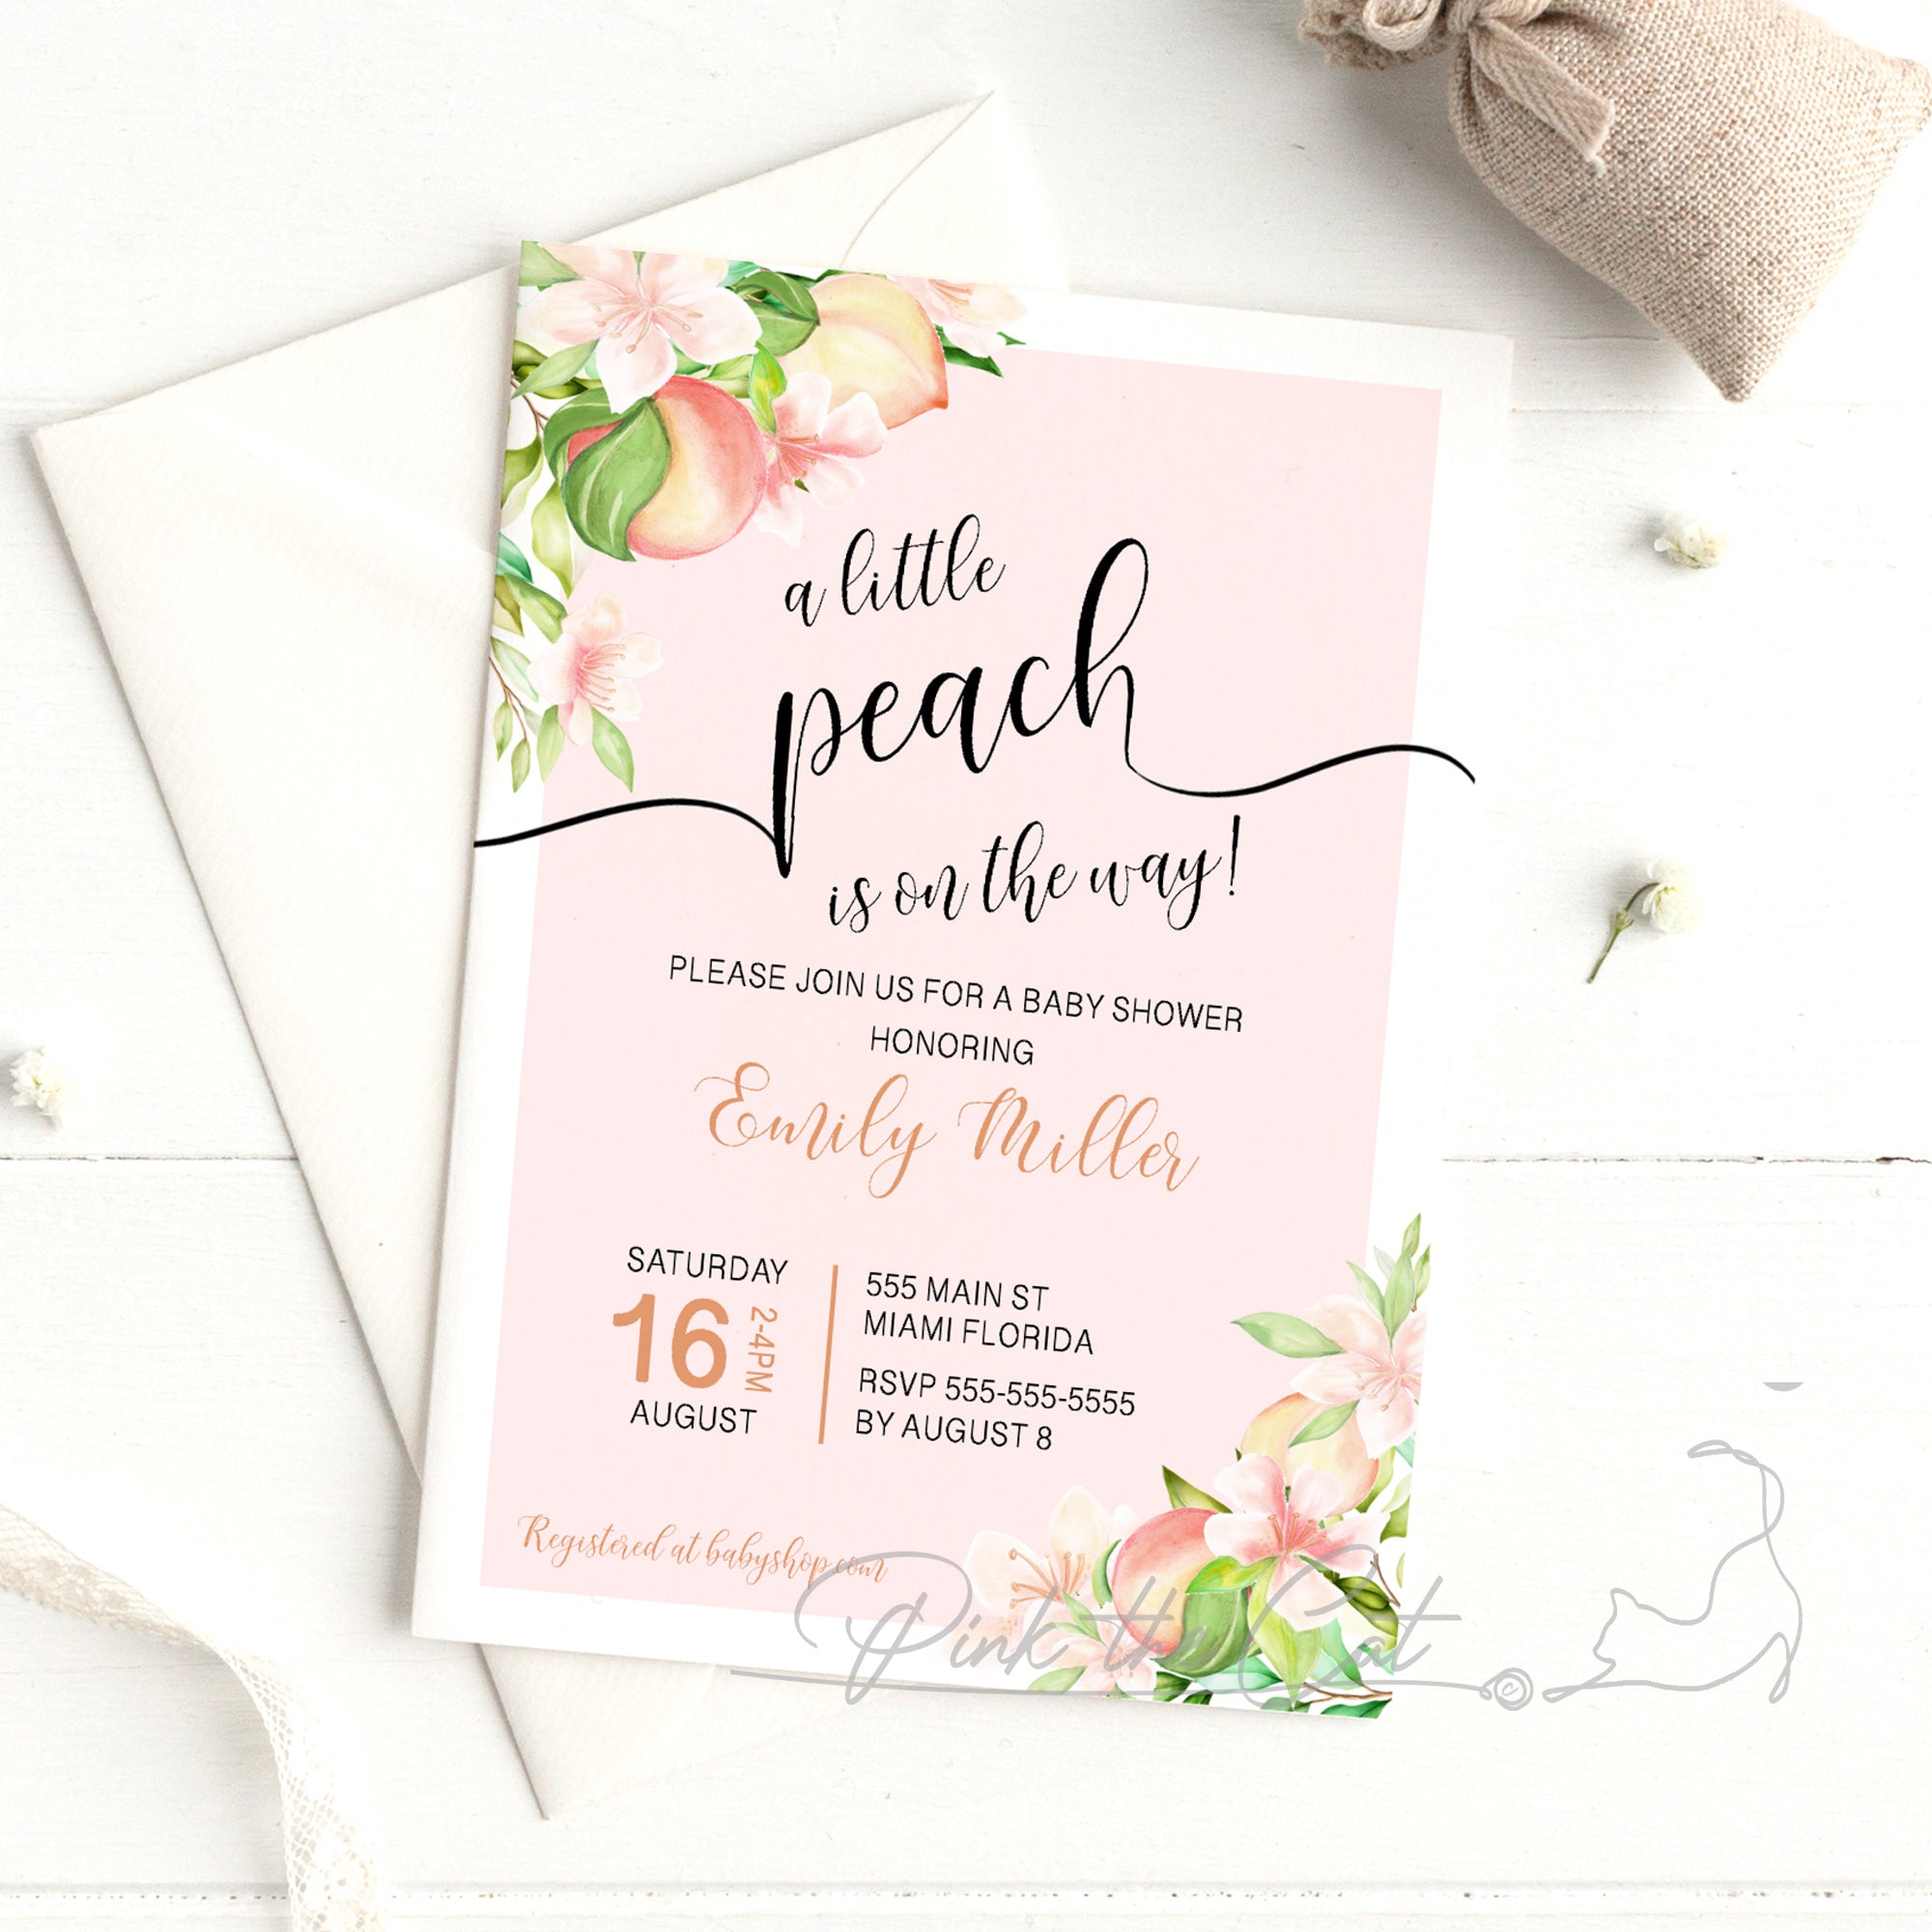 A little peach on the way baby shower or by mail distant invitation